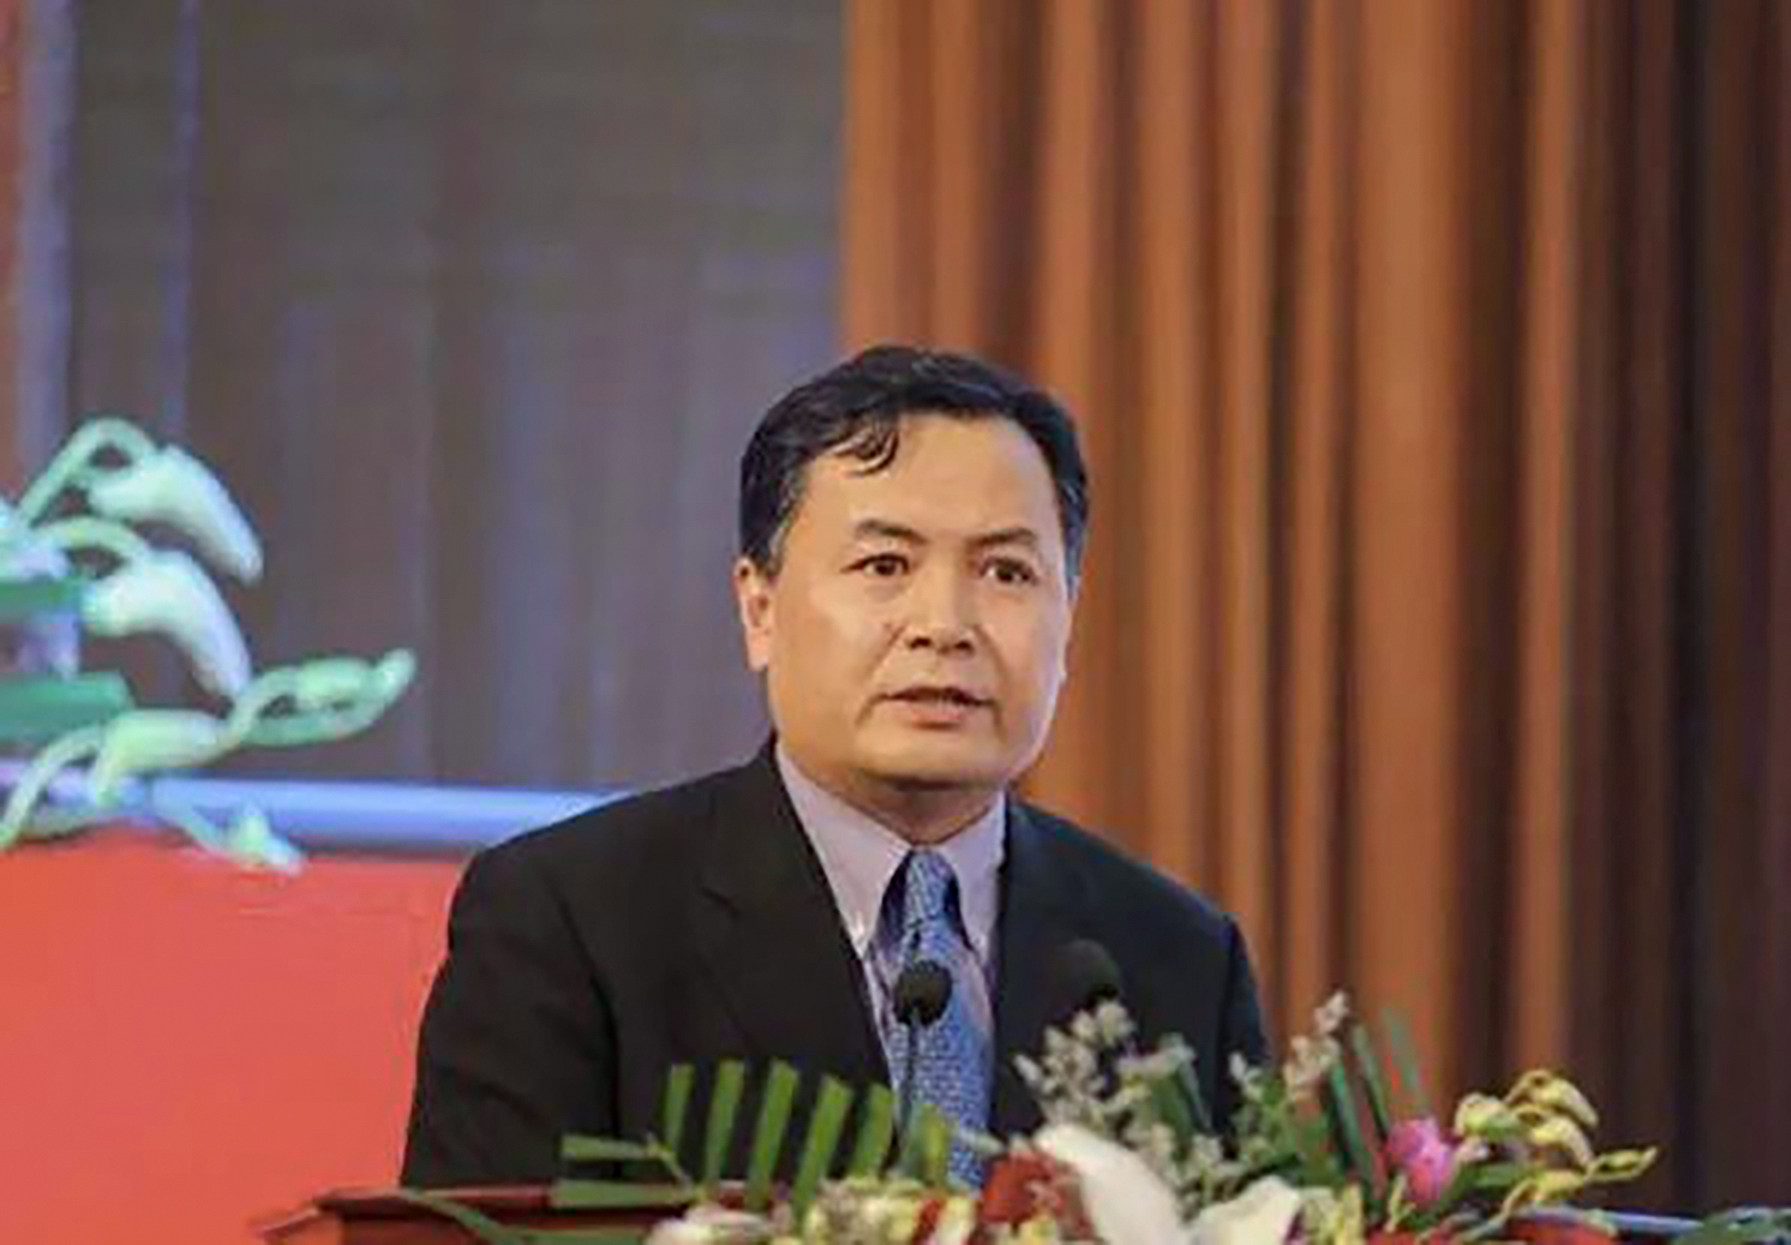 Jiao Xiaoping (pictured), a former official with China’s ministry of finance, has been ousted from the Communist Party after a months-long investigation. Photo: Weibo